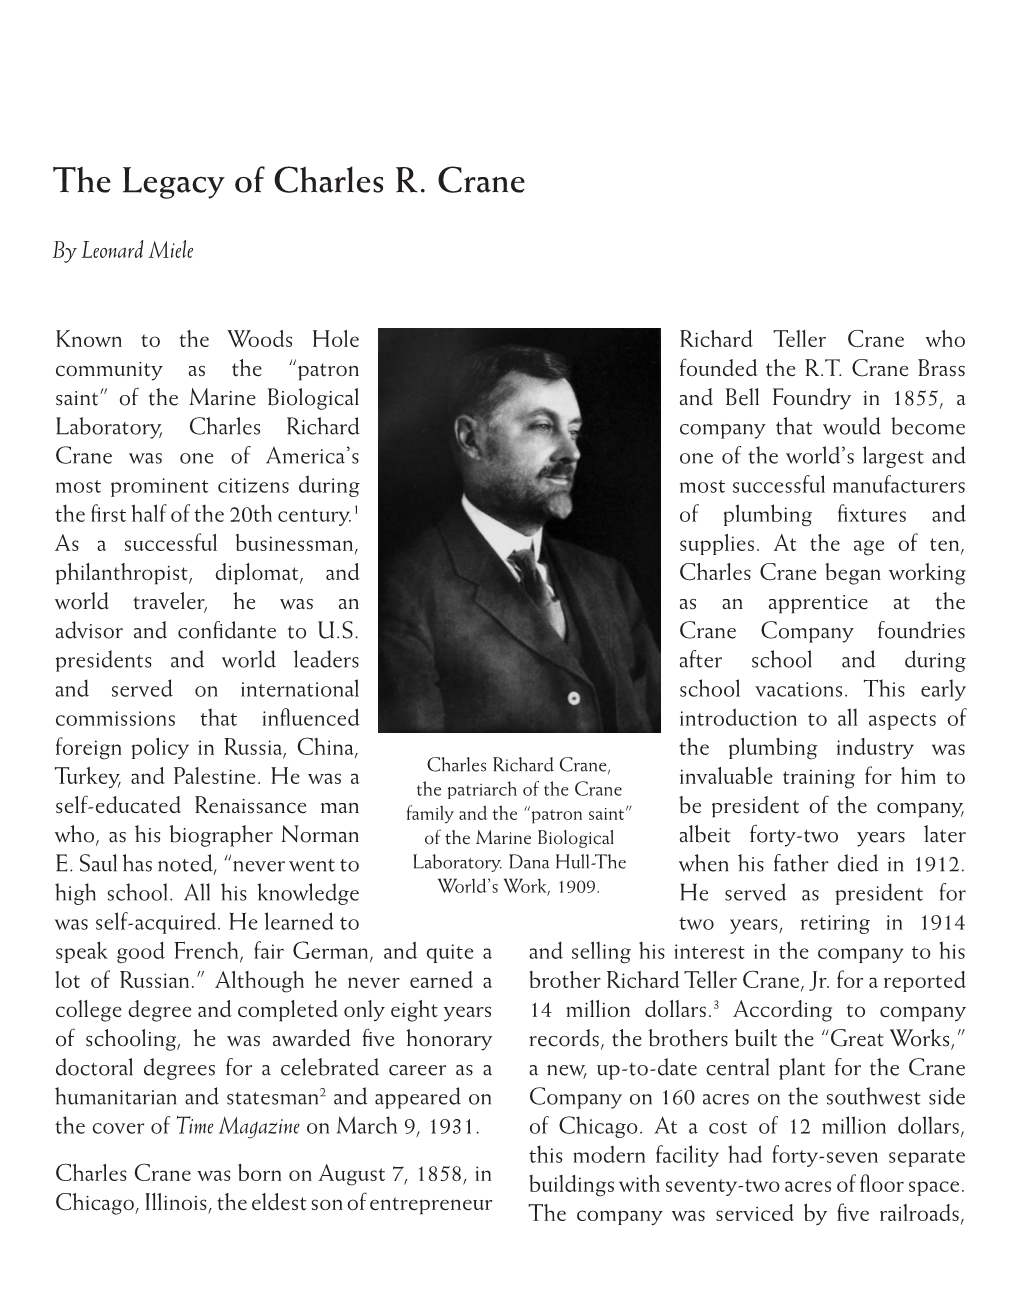 The Legacy of Charles R. Crane